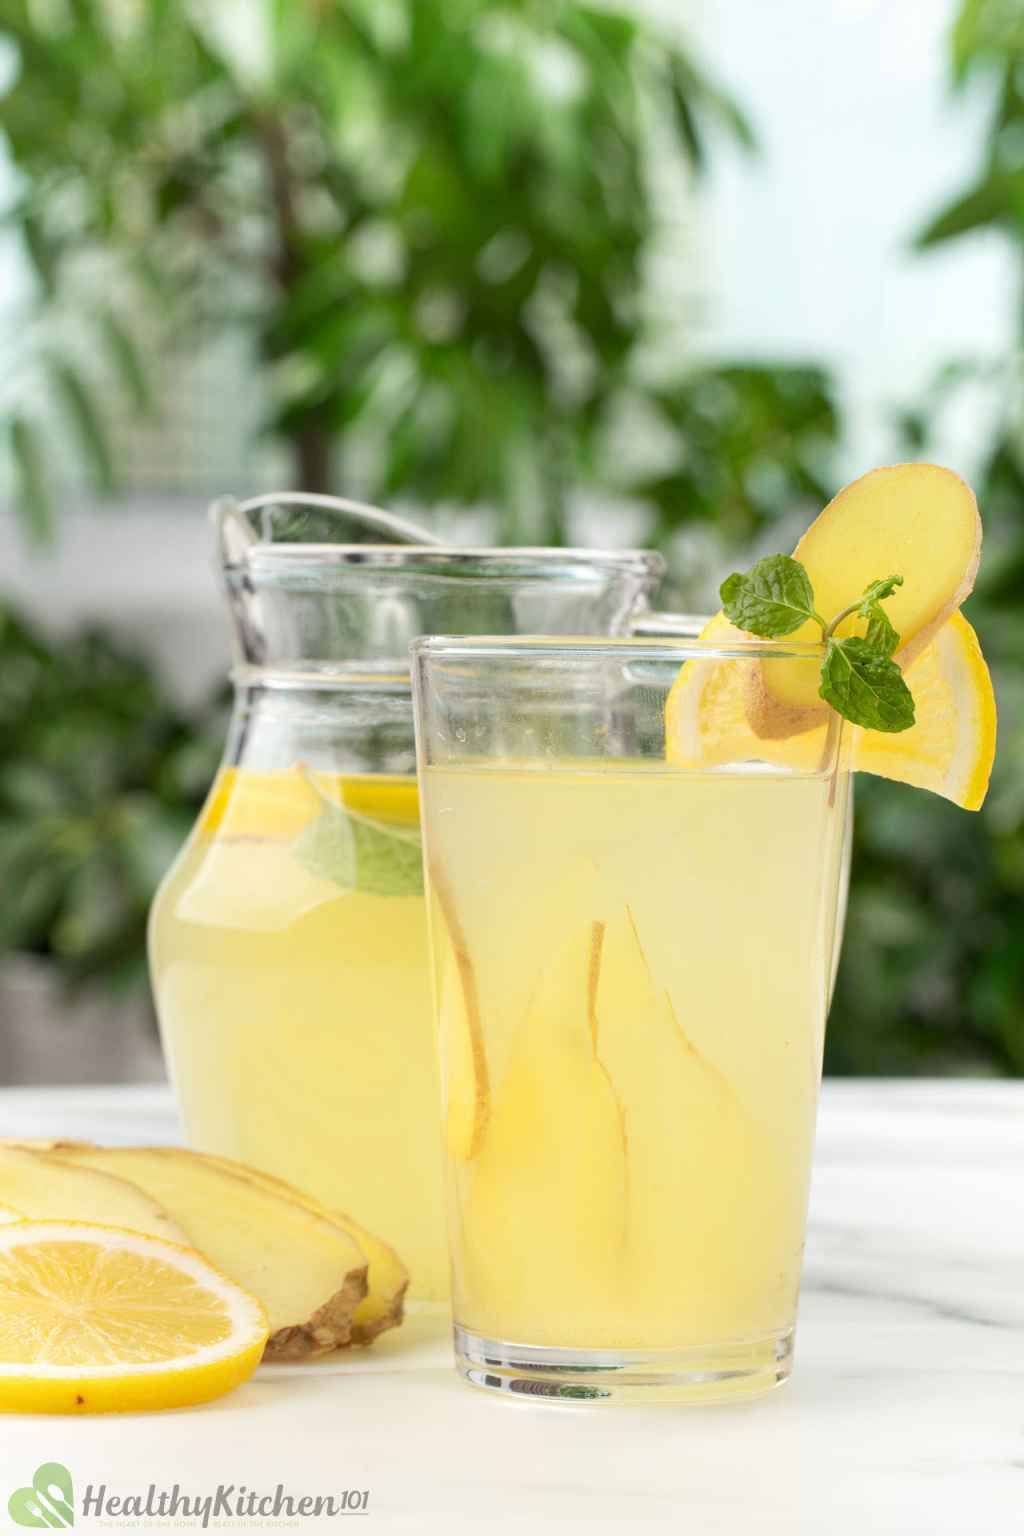 Ginger Water Recipe Guide To A Refreshing And Invigorating Drink